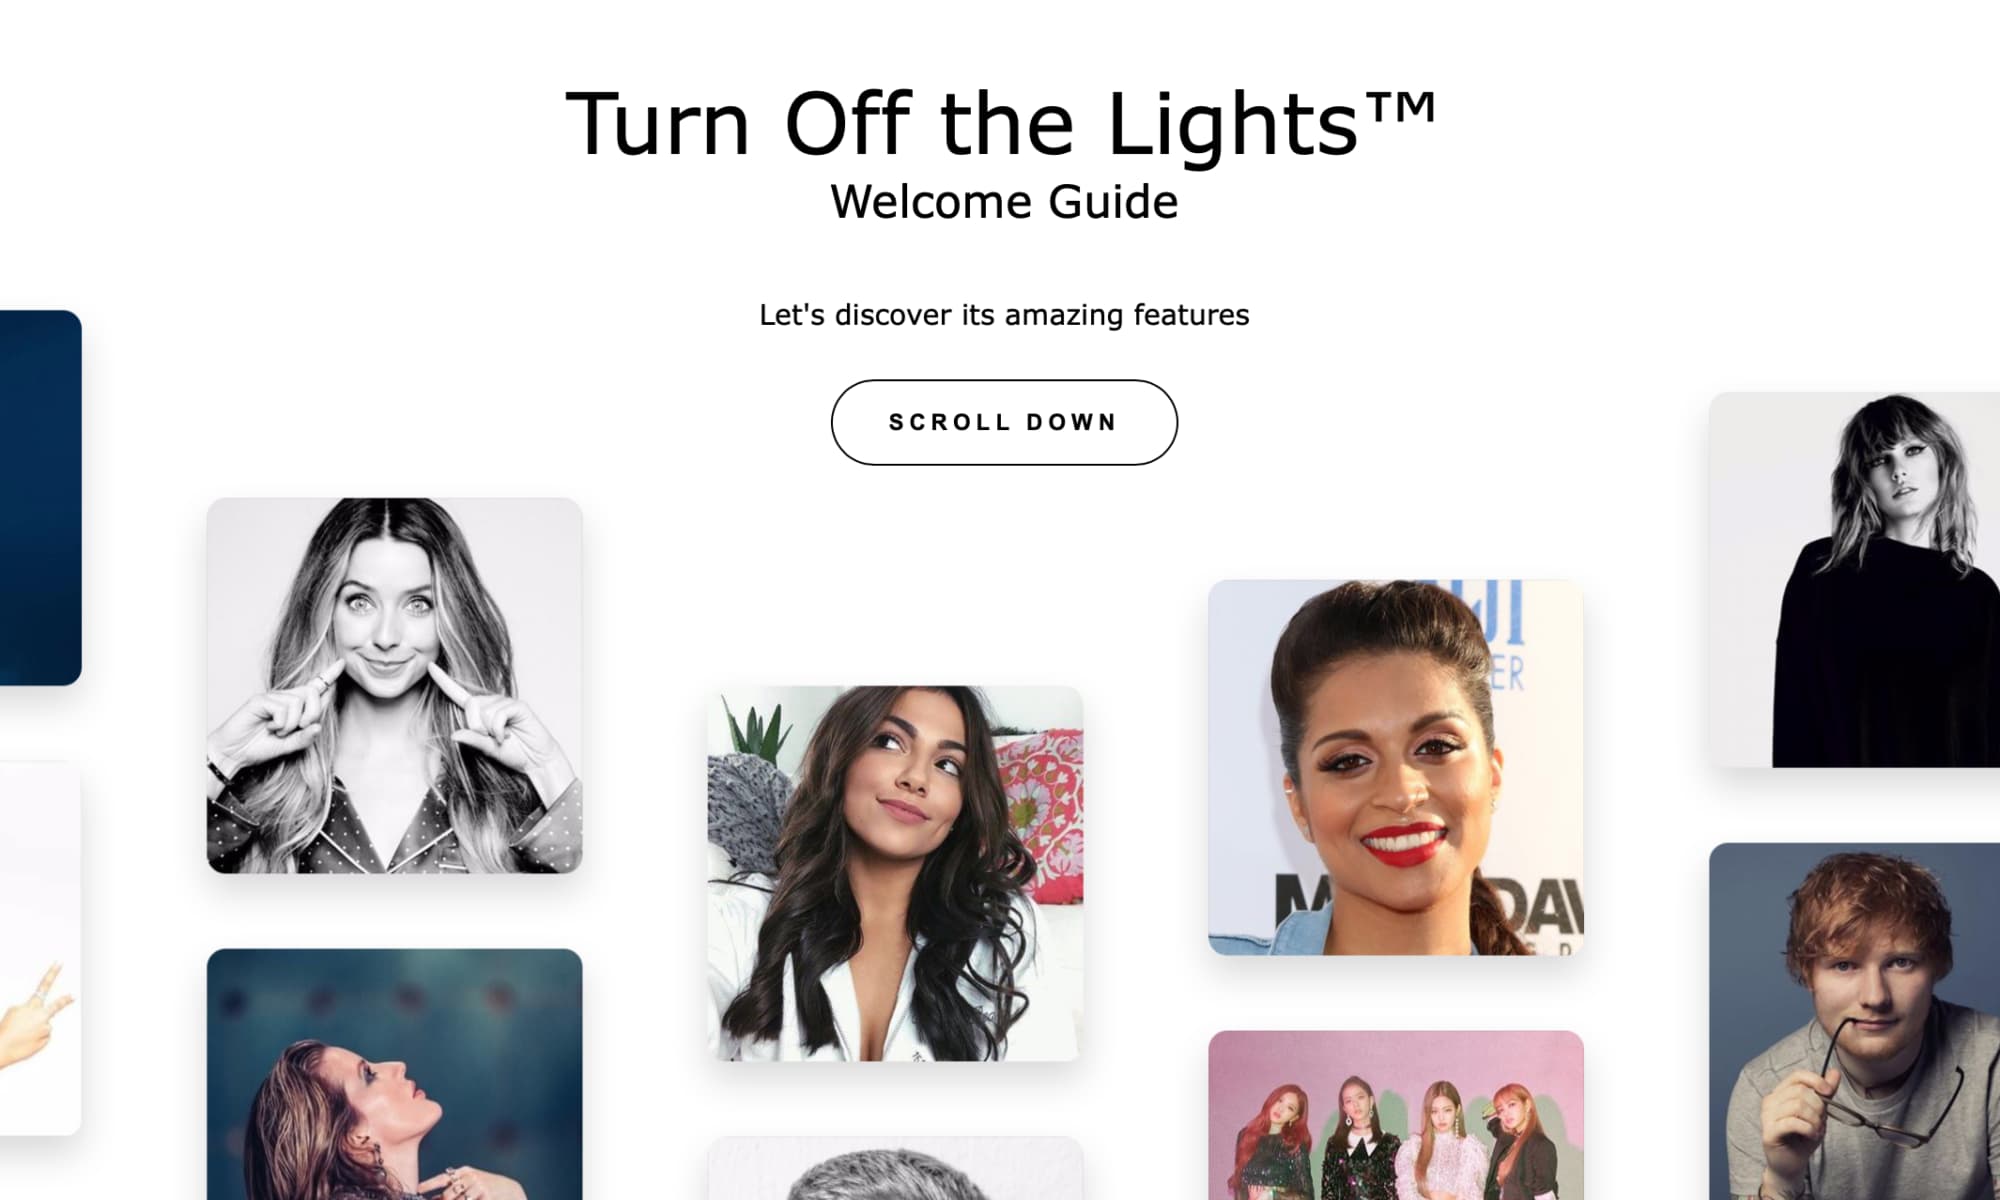 New interactive welcome guide of the Turn Off the Lights browser extension